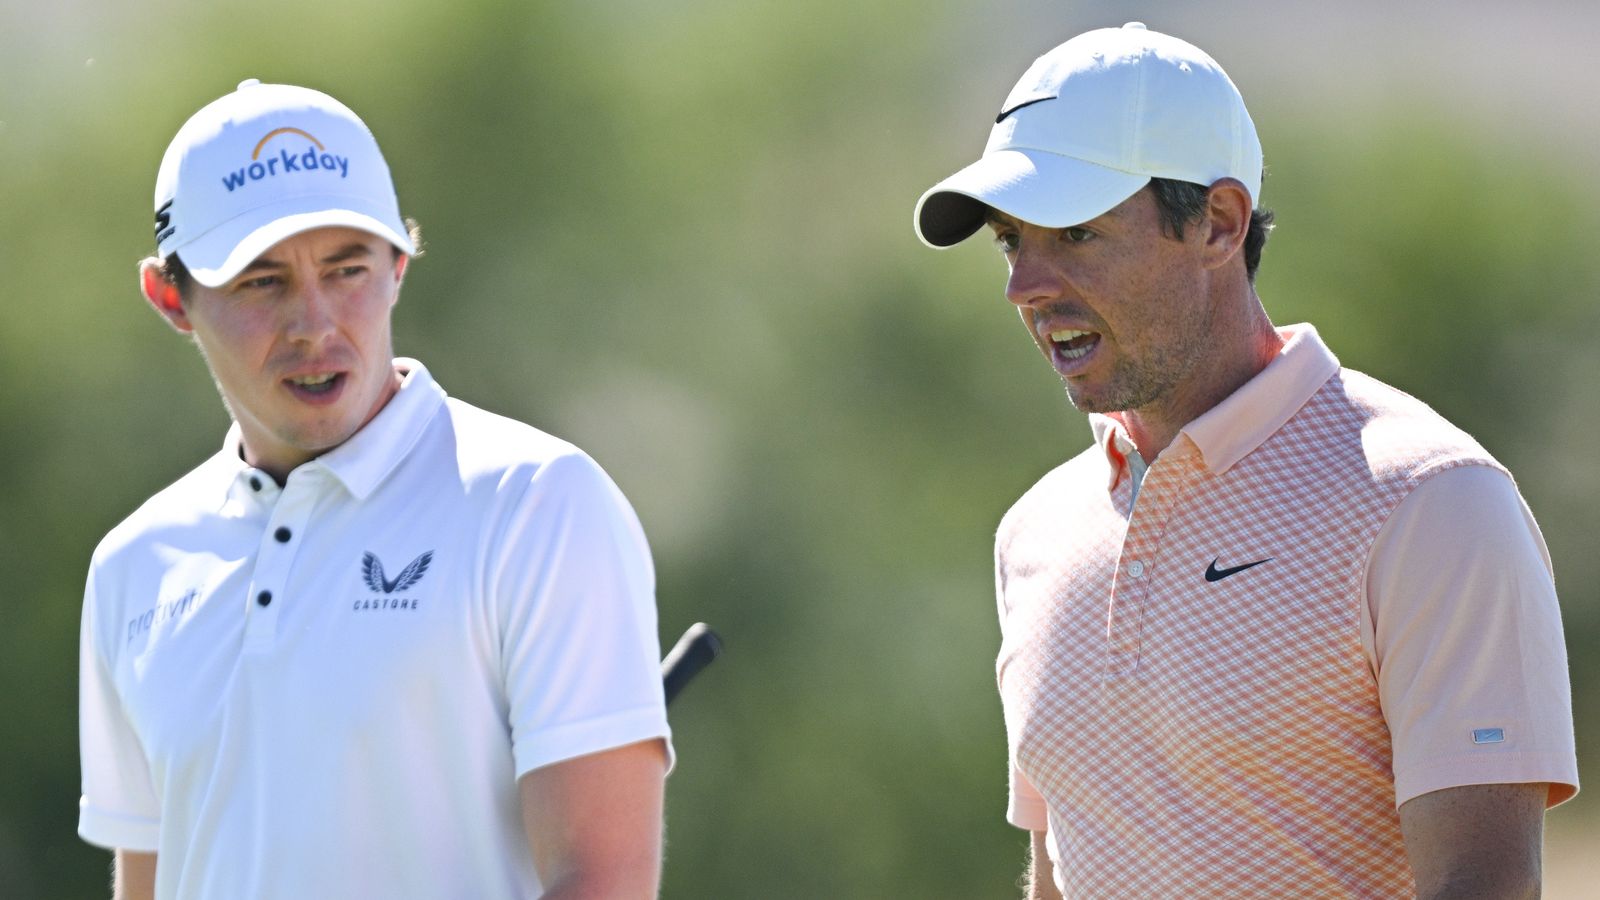 Should LIV Golf members earn world ranking points? Rory McIlroy and Matt Fitzpatrick have their say